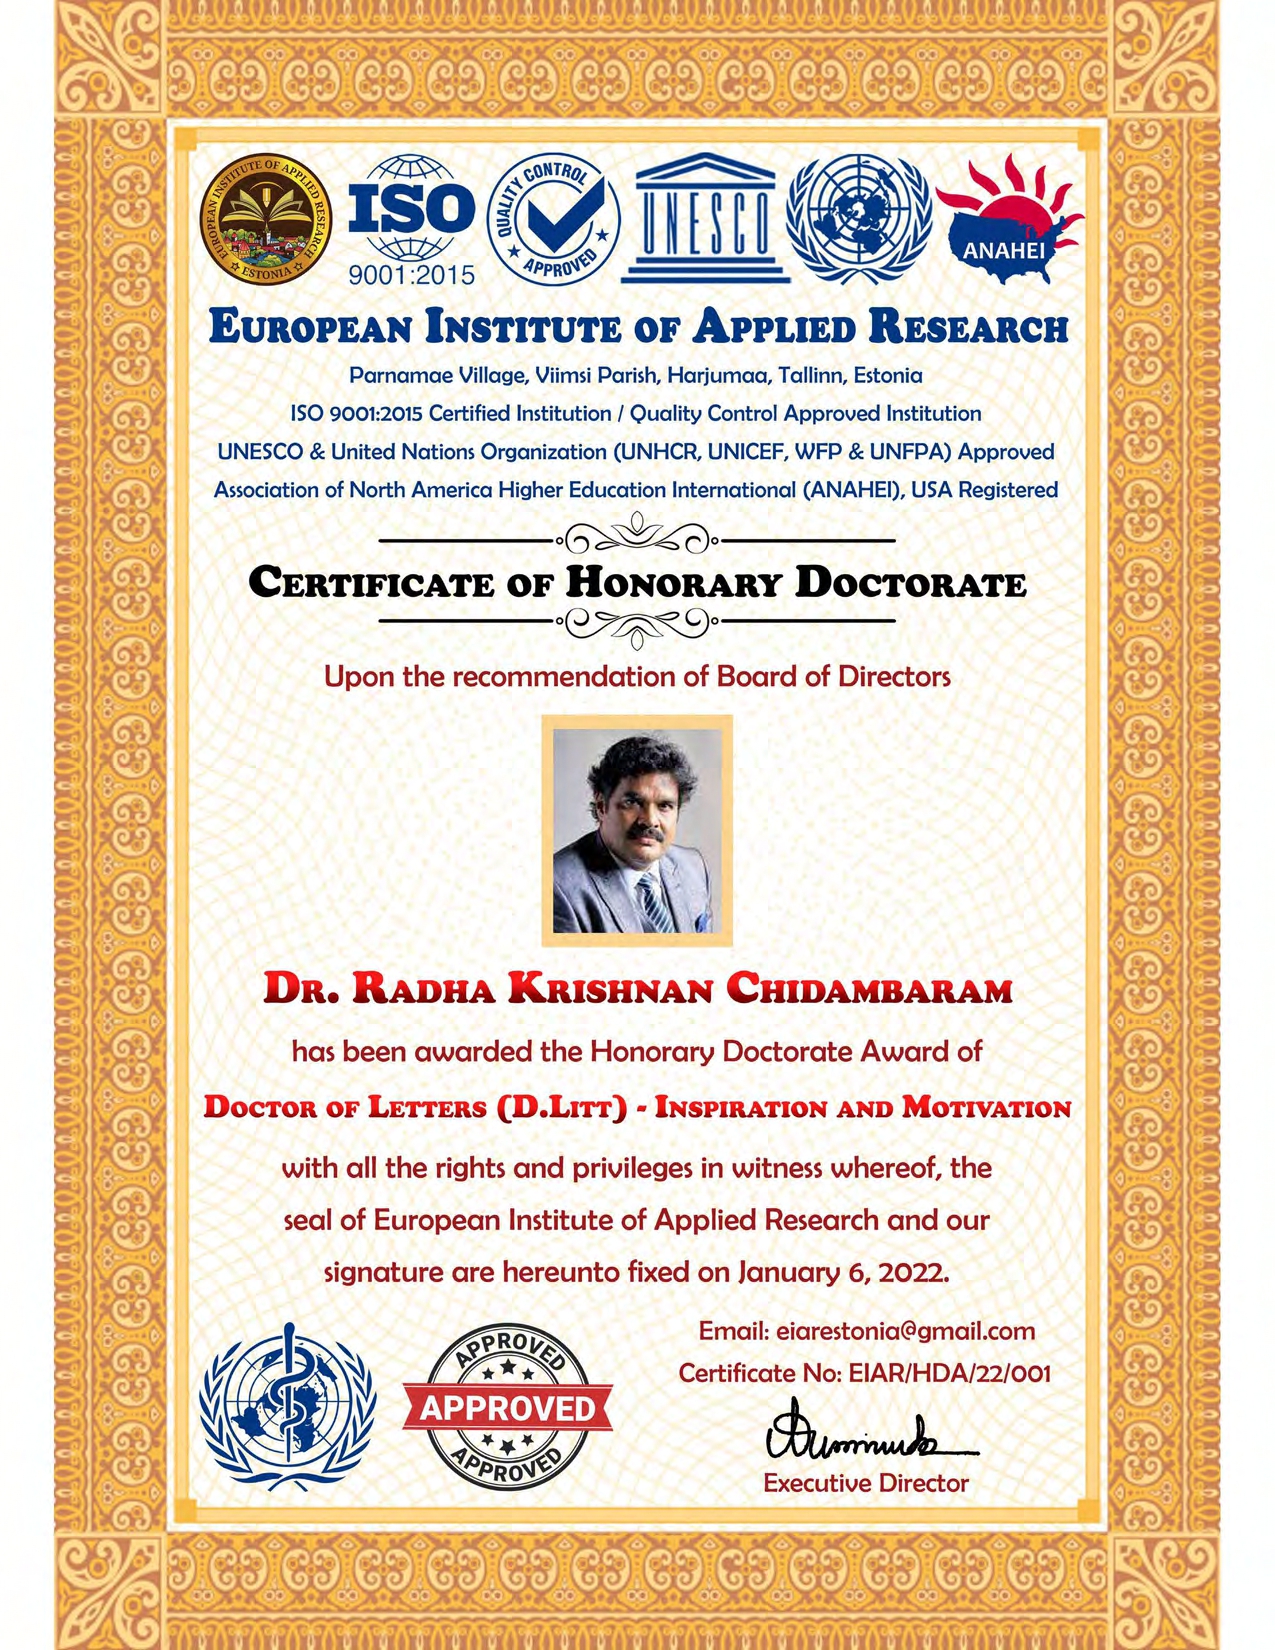 RK Sir All Certificates c 8-page-00001